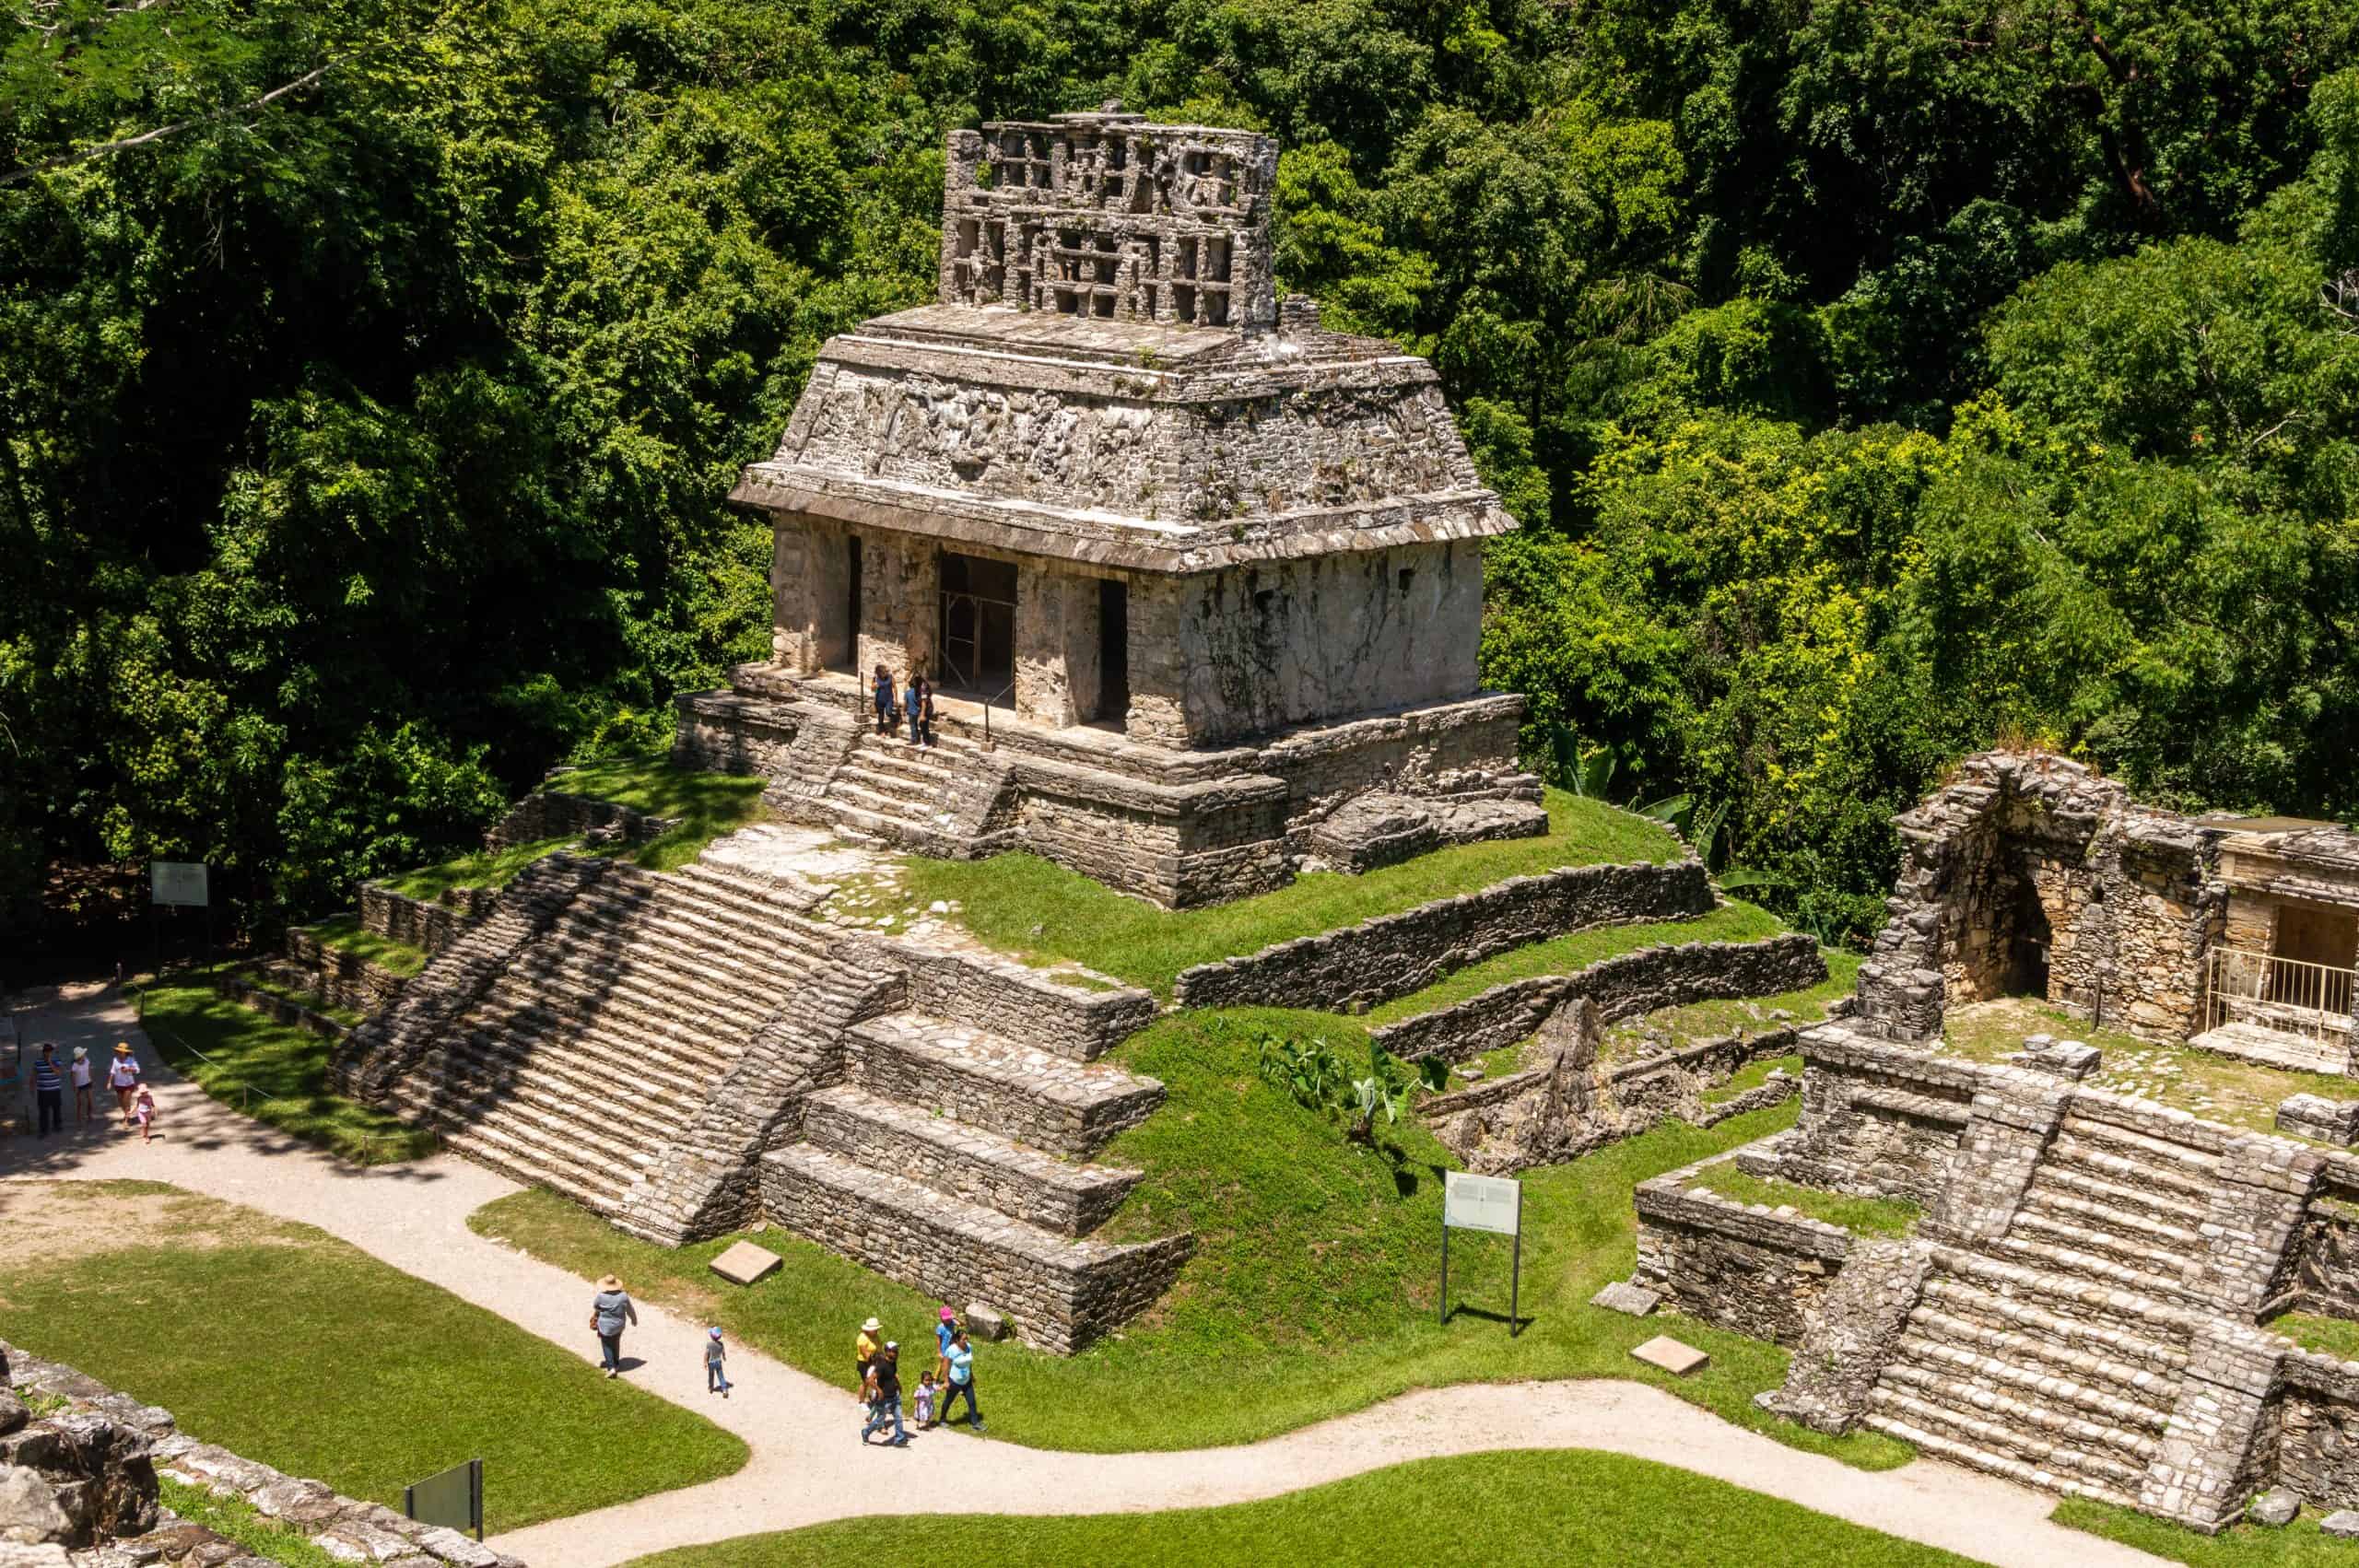 How To Get From Merida To Palenque By Bus - All Possible Ways, cheapest way from Merida to Palenque,  Merida to Palenque, ado bus from Merida to Palenque, AU Autobuses unidos bus from Merida to Palenque, shared van from Merida to Palenque, Colectivo from Merida to Palenque, Uber from Merida to Palenque, taxi from Merida to Palenque